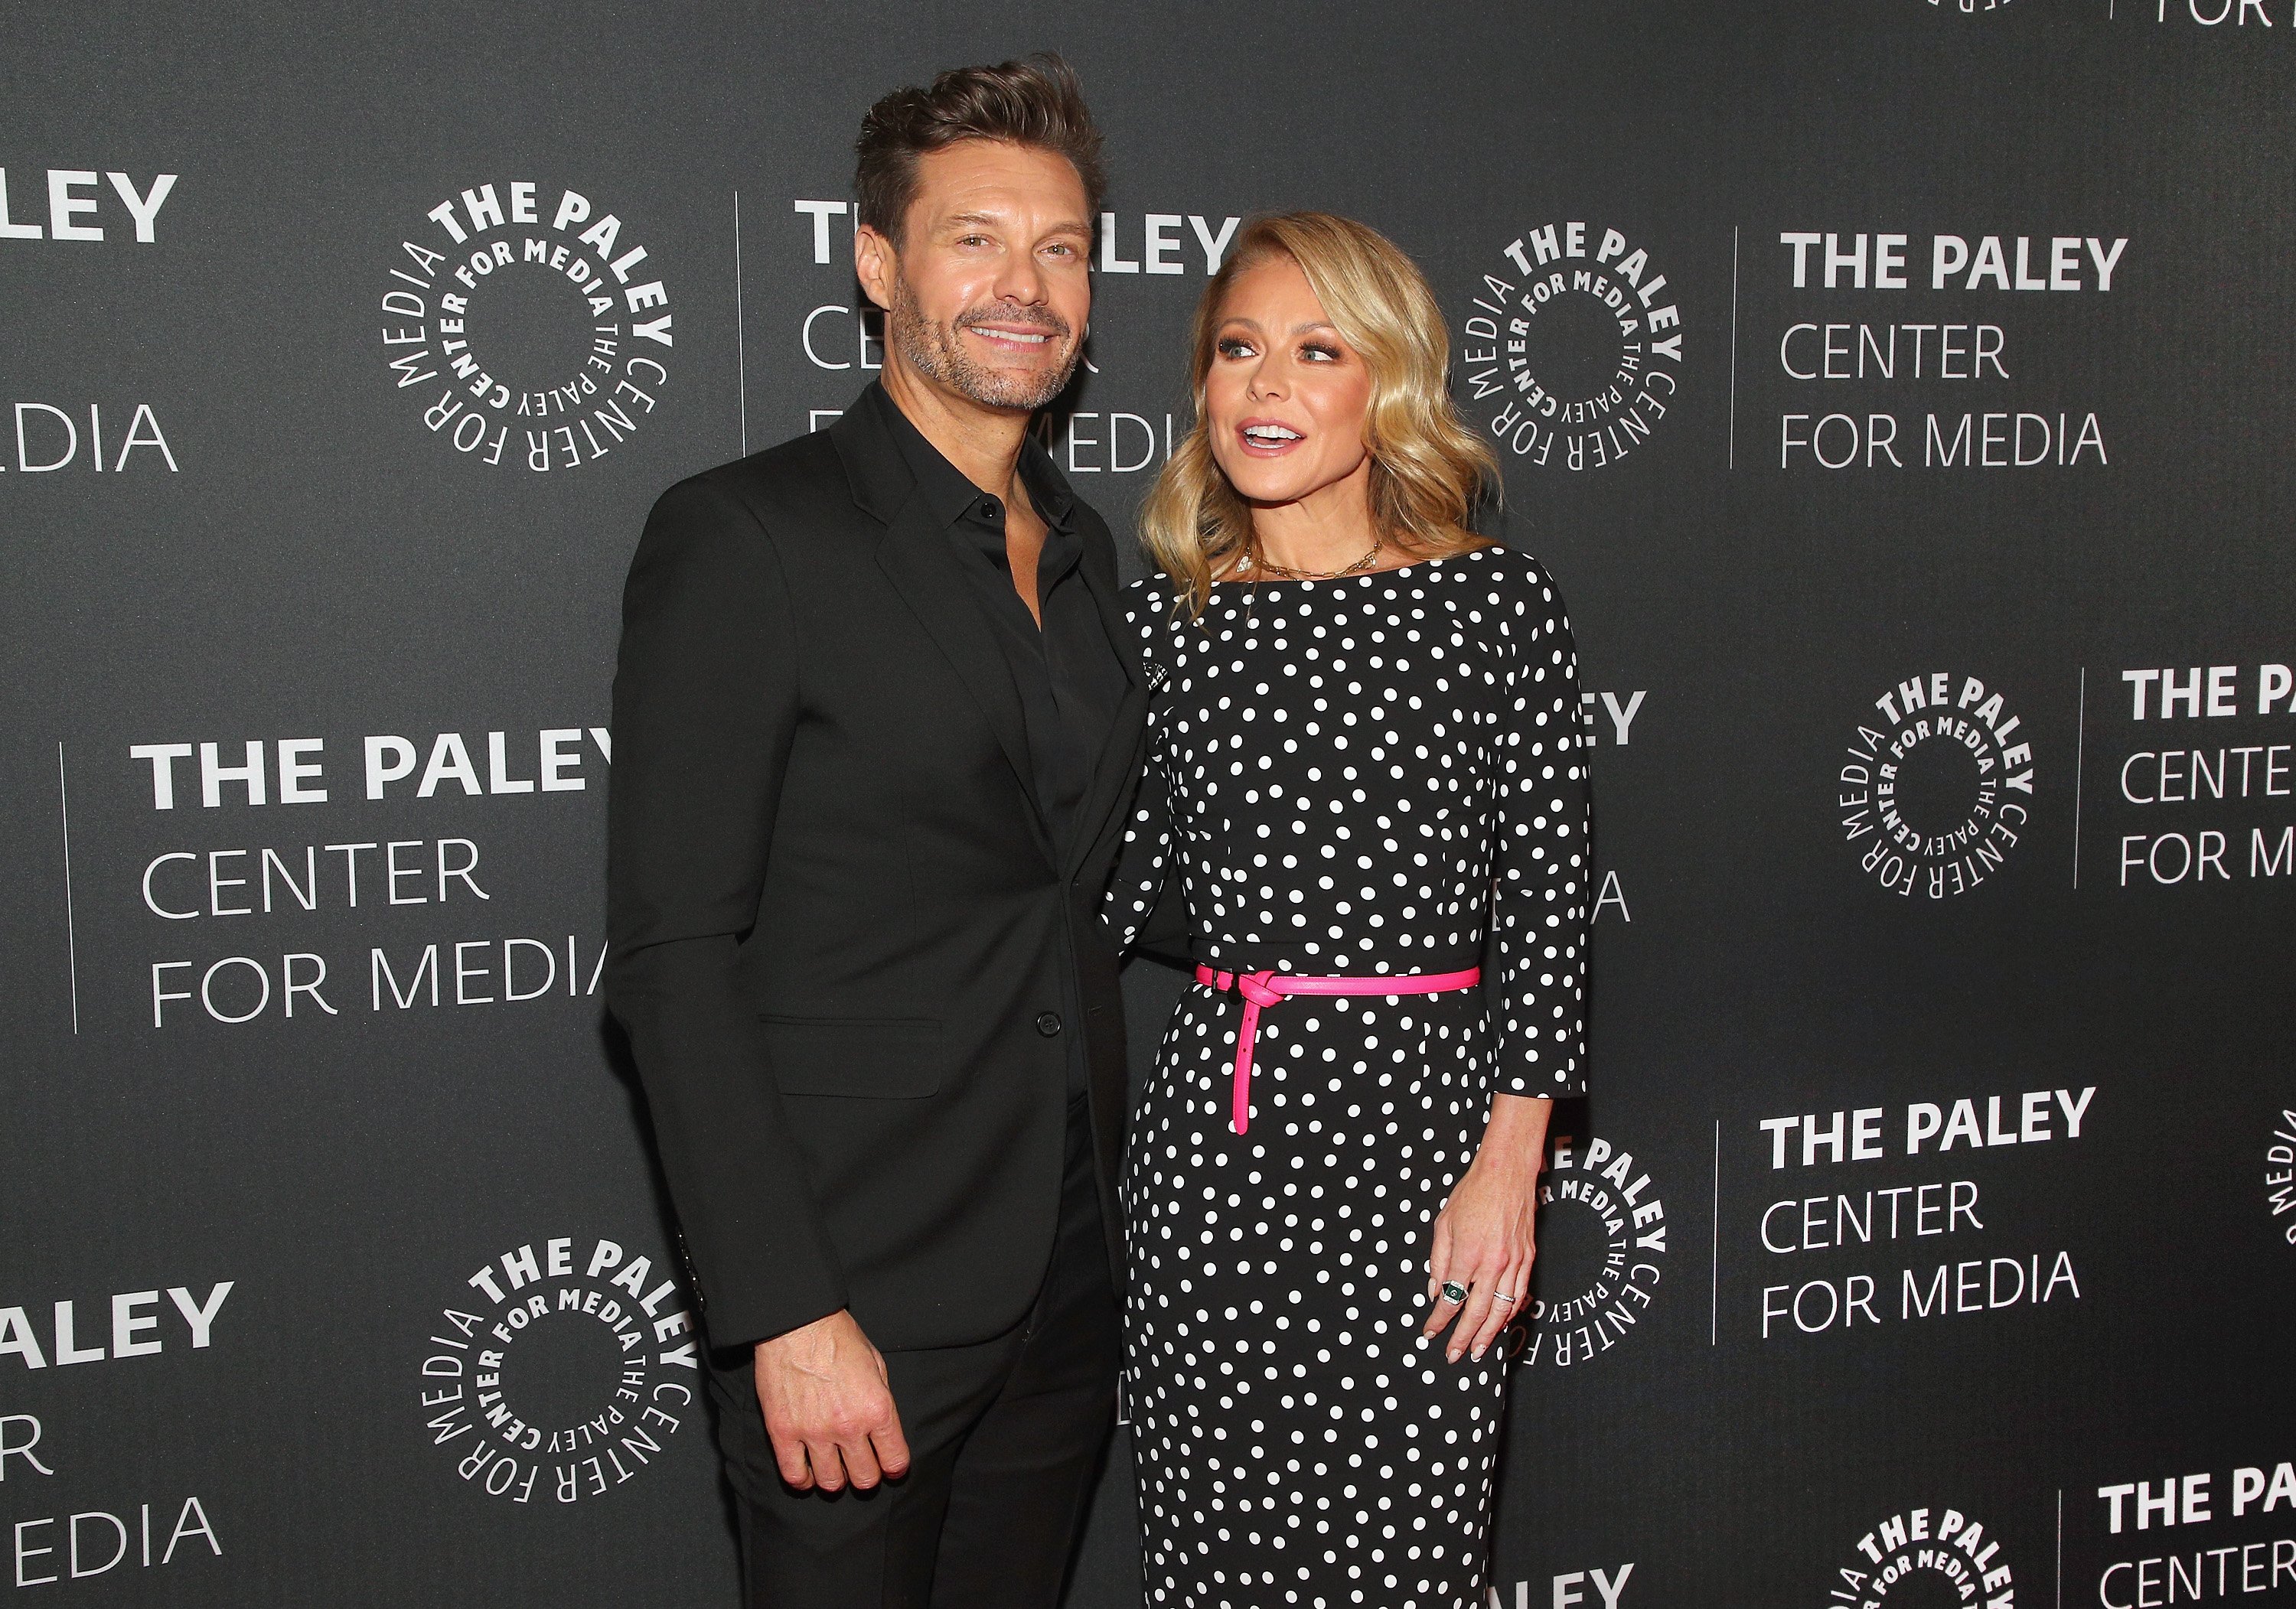 Ryan Seacrest and Kelly Ripa at Paley Center For Media on March 04, 2020. | Photo: Getty Images